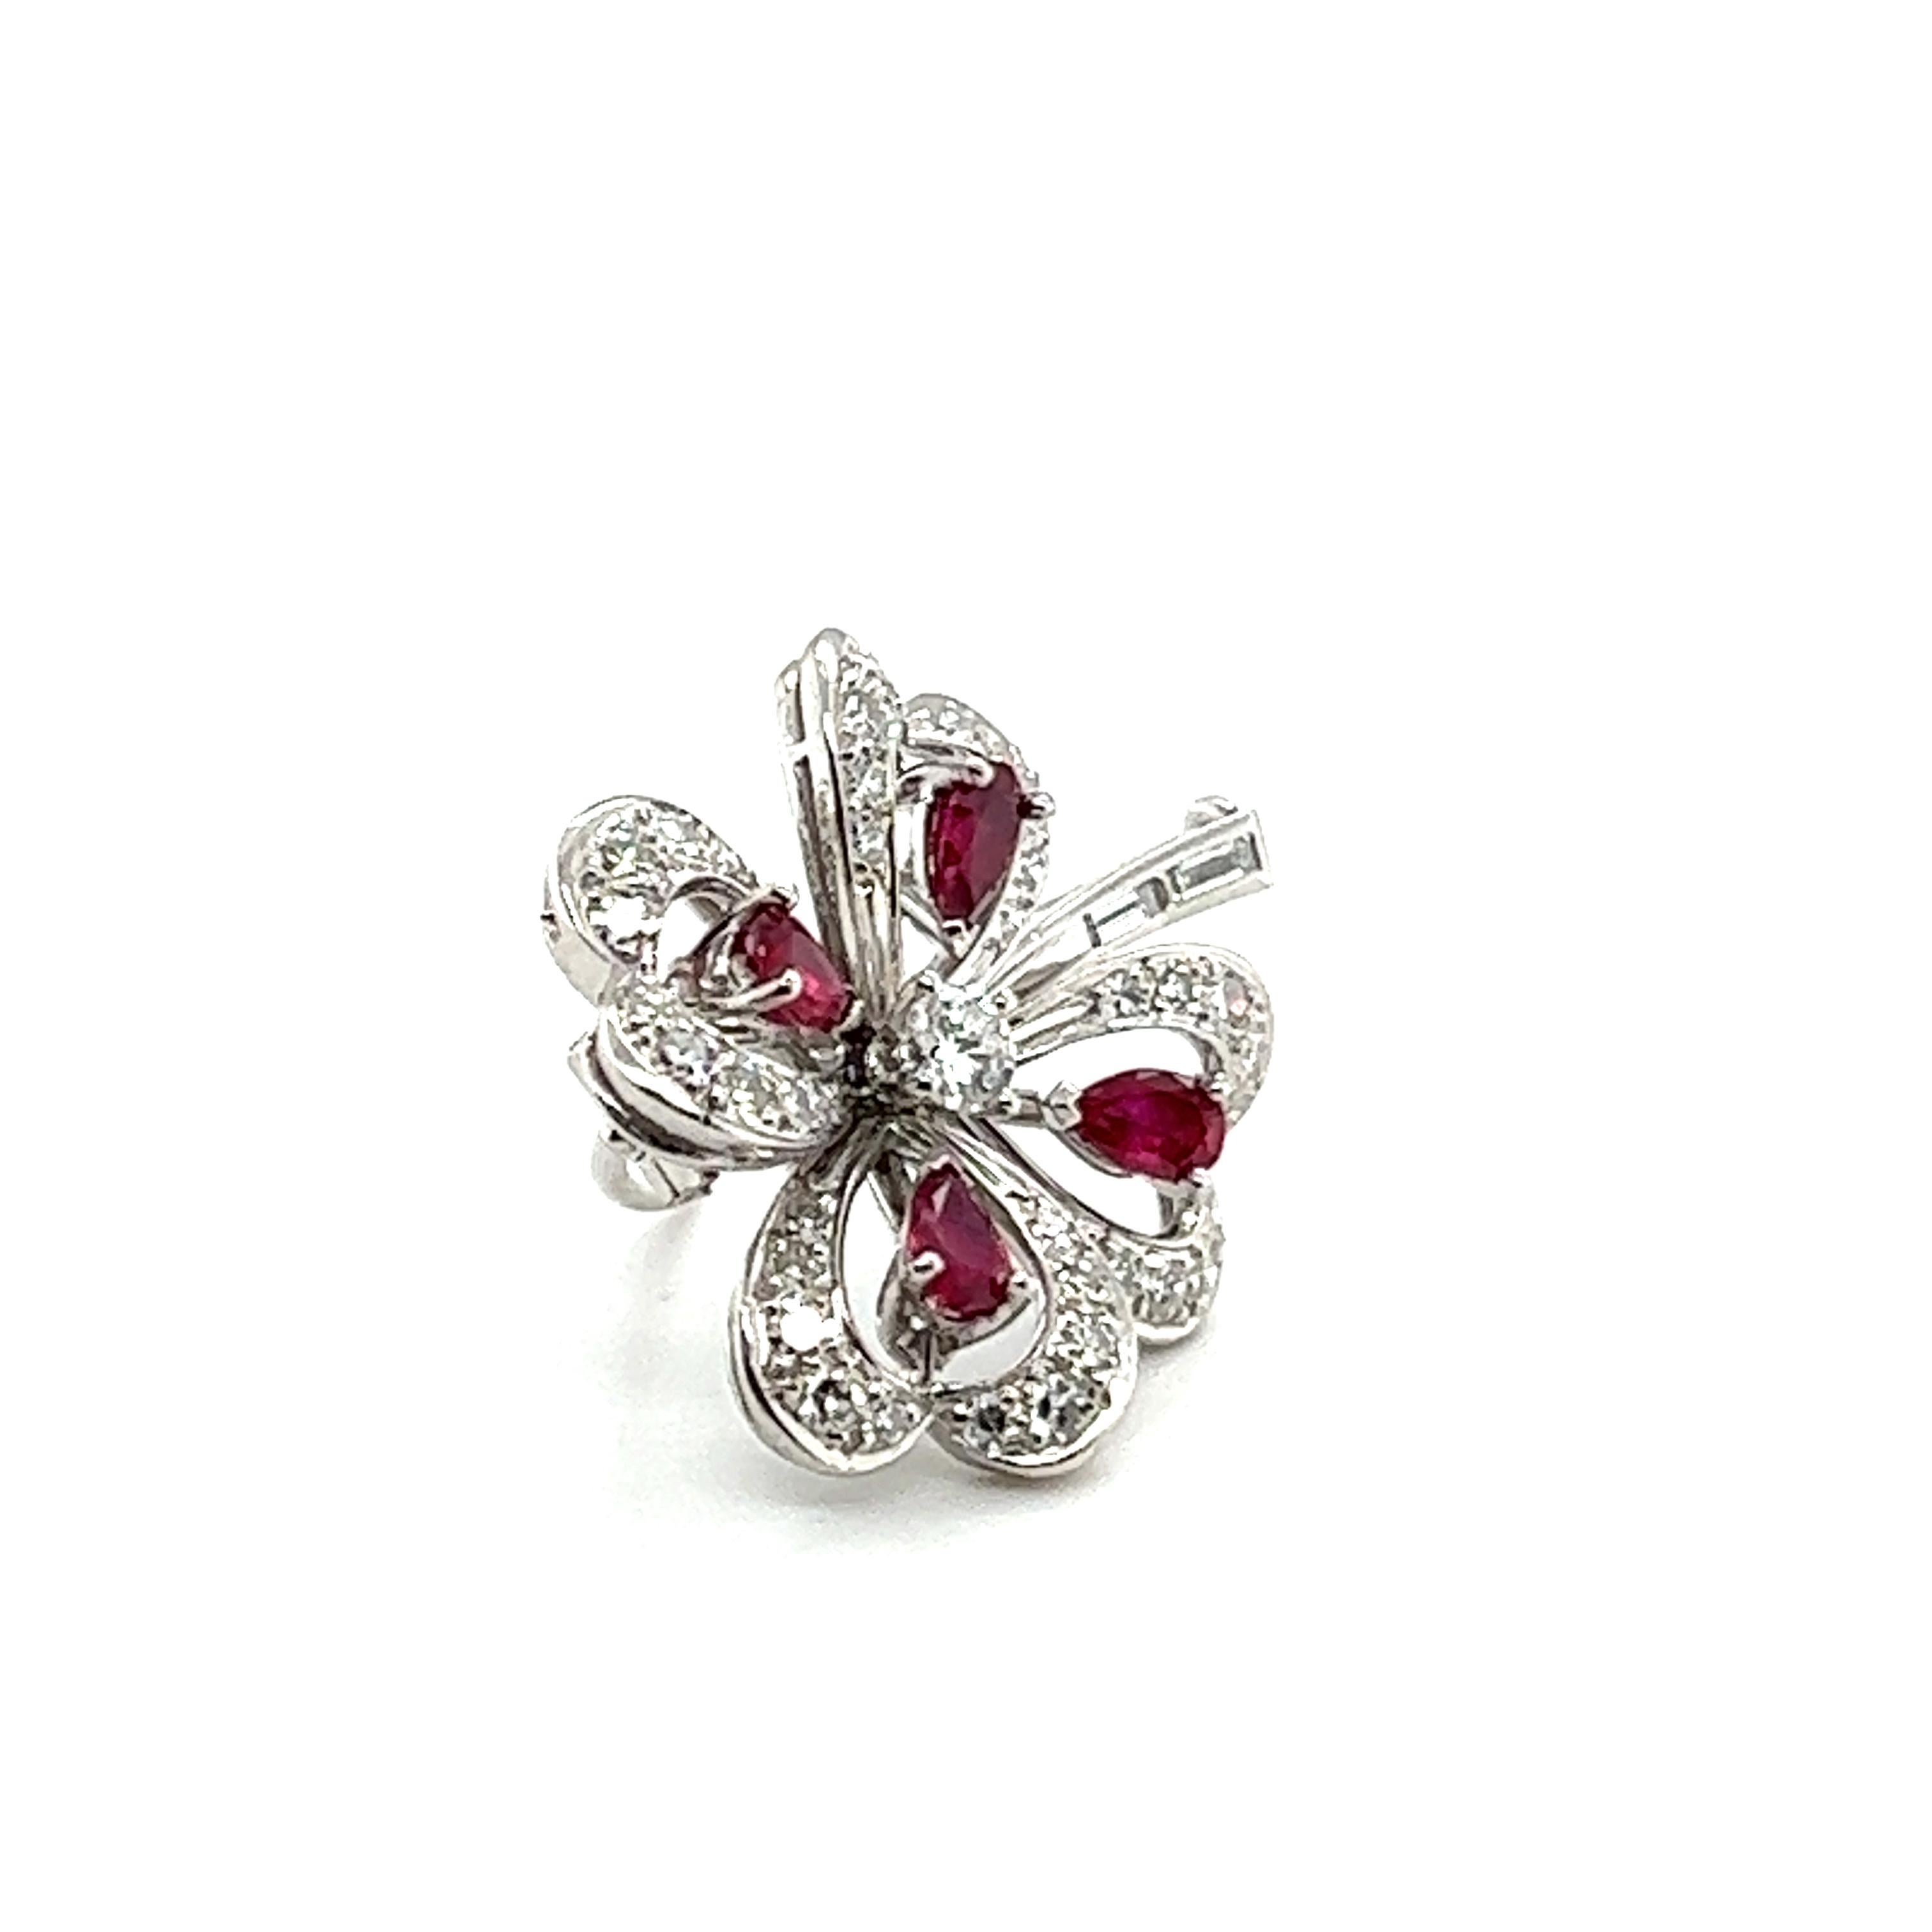 Modern Clover Brooch with Rubies & Diamonds in 18 Karat White Gold by Meister